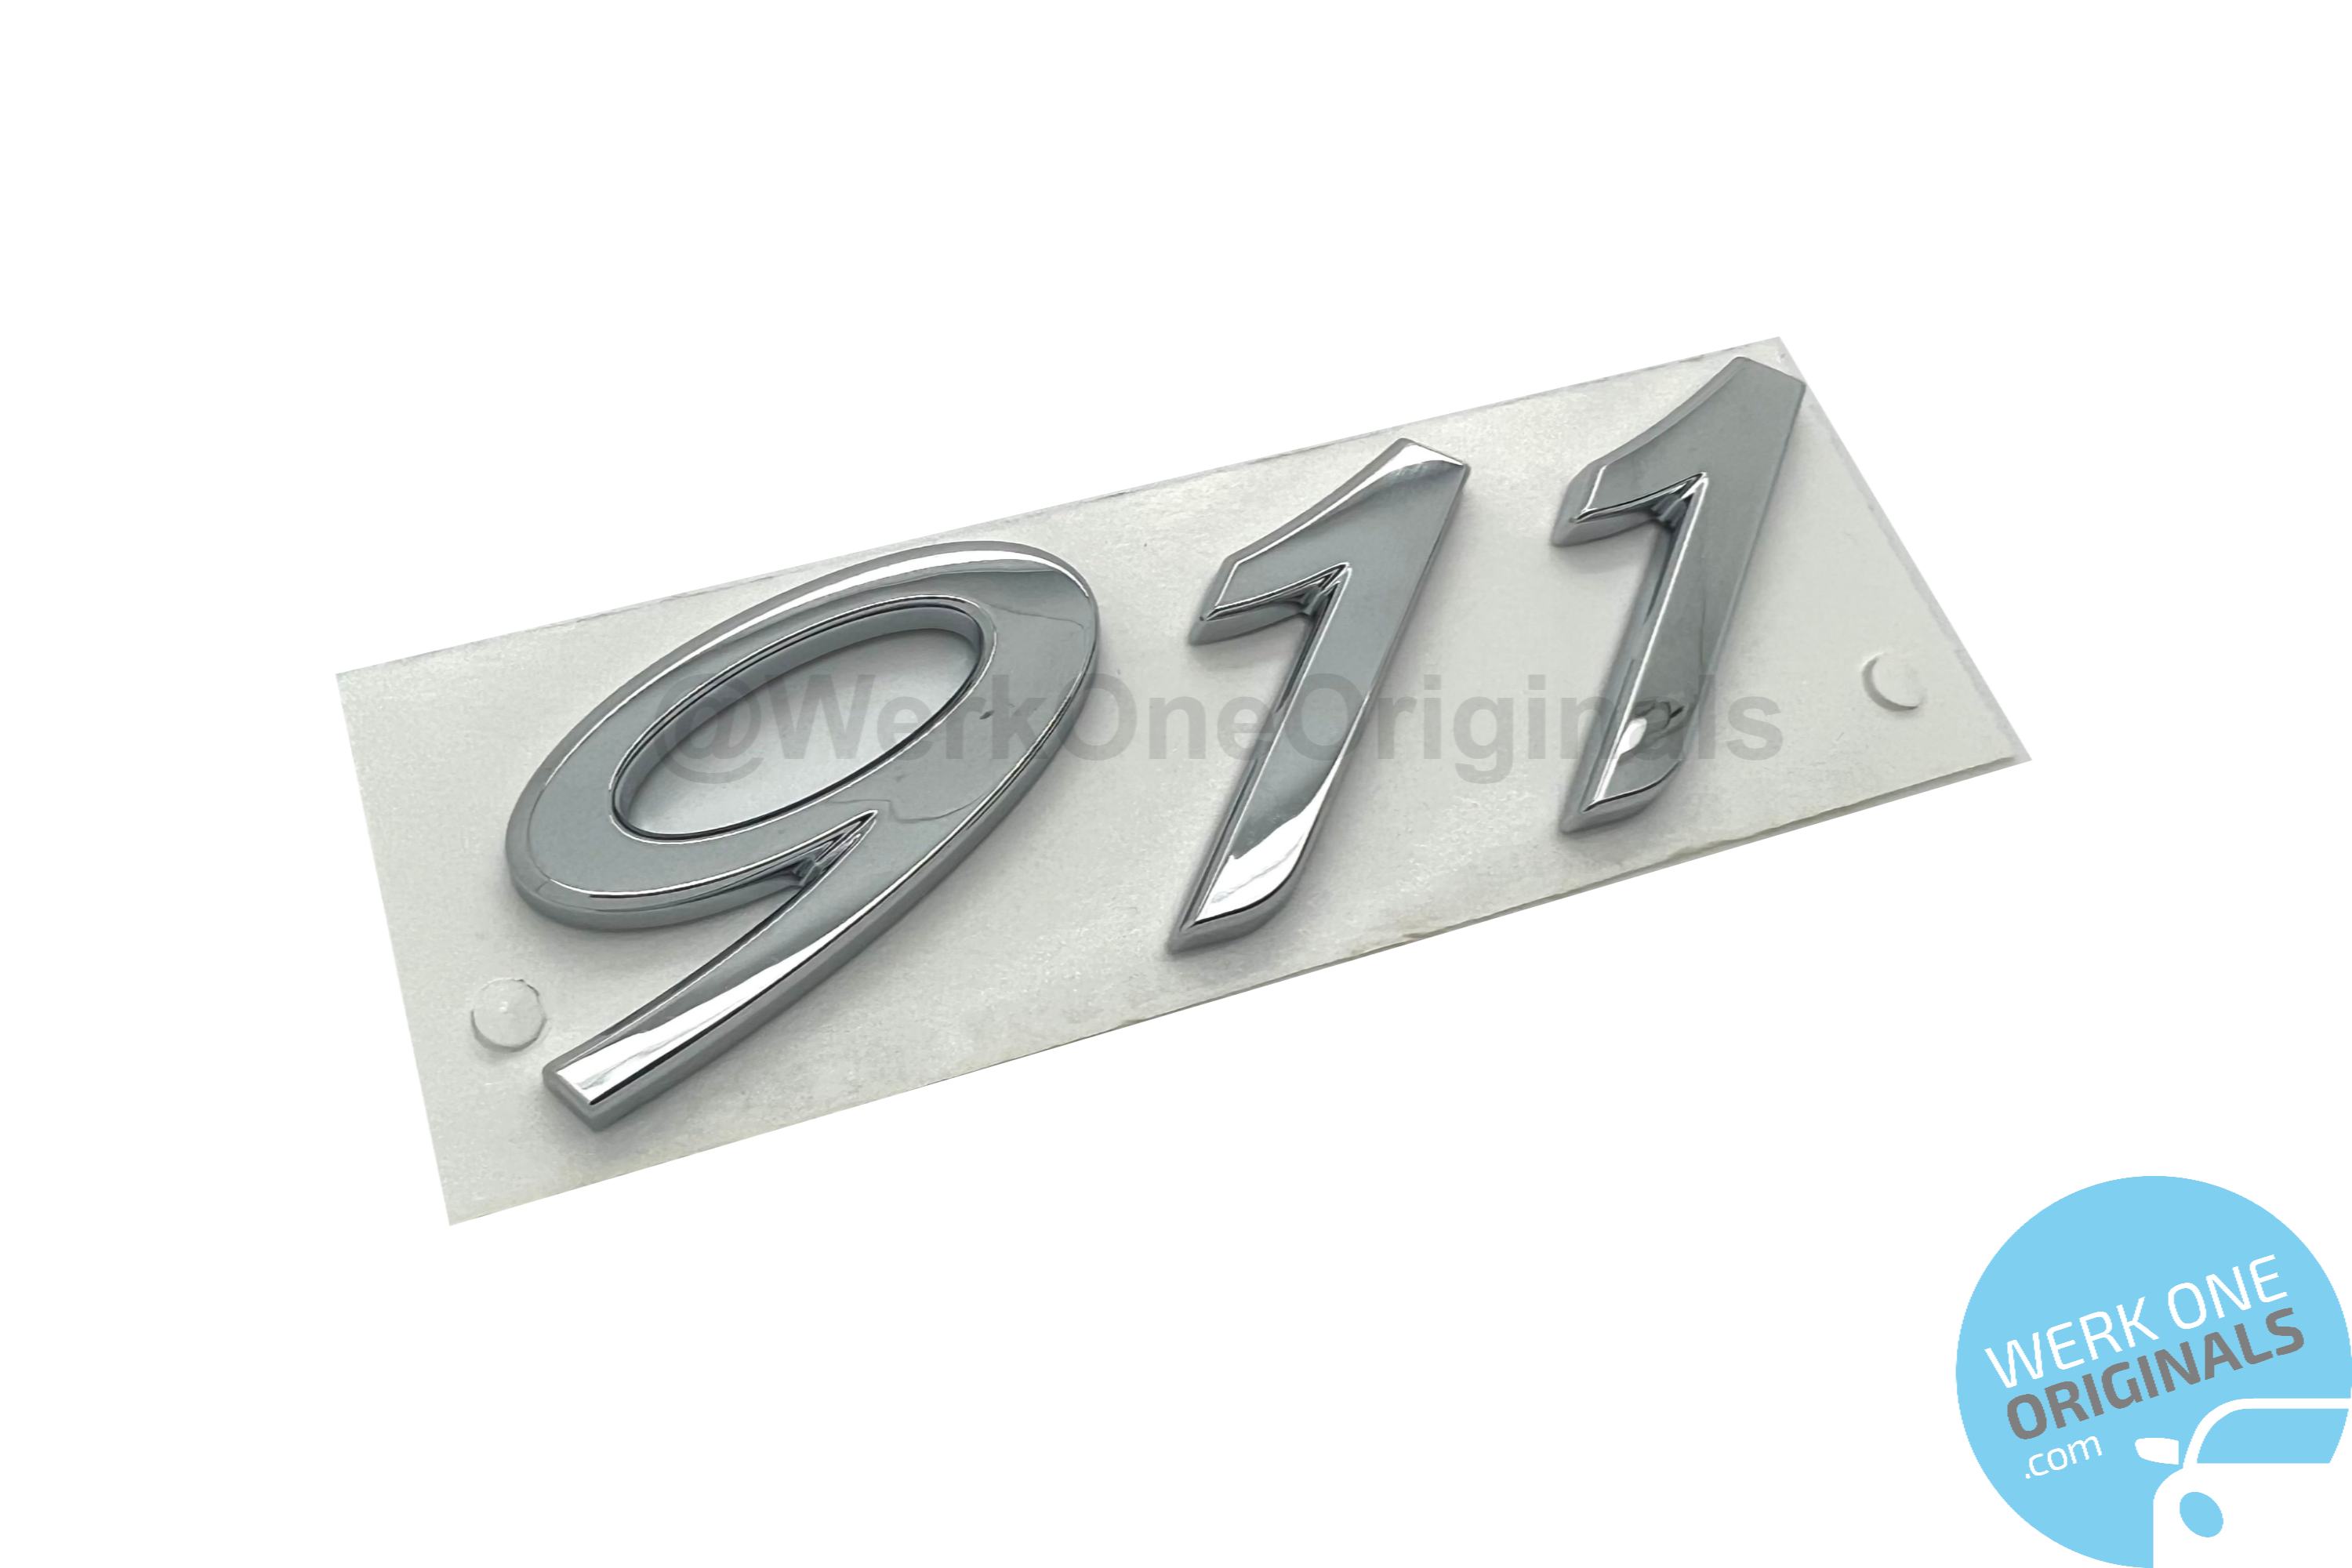 Porsche Official '911' Rear Badge Decal in Chrome Silver for 911 Type 911G Models